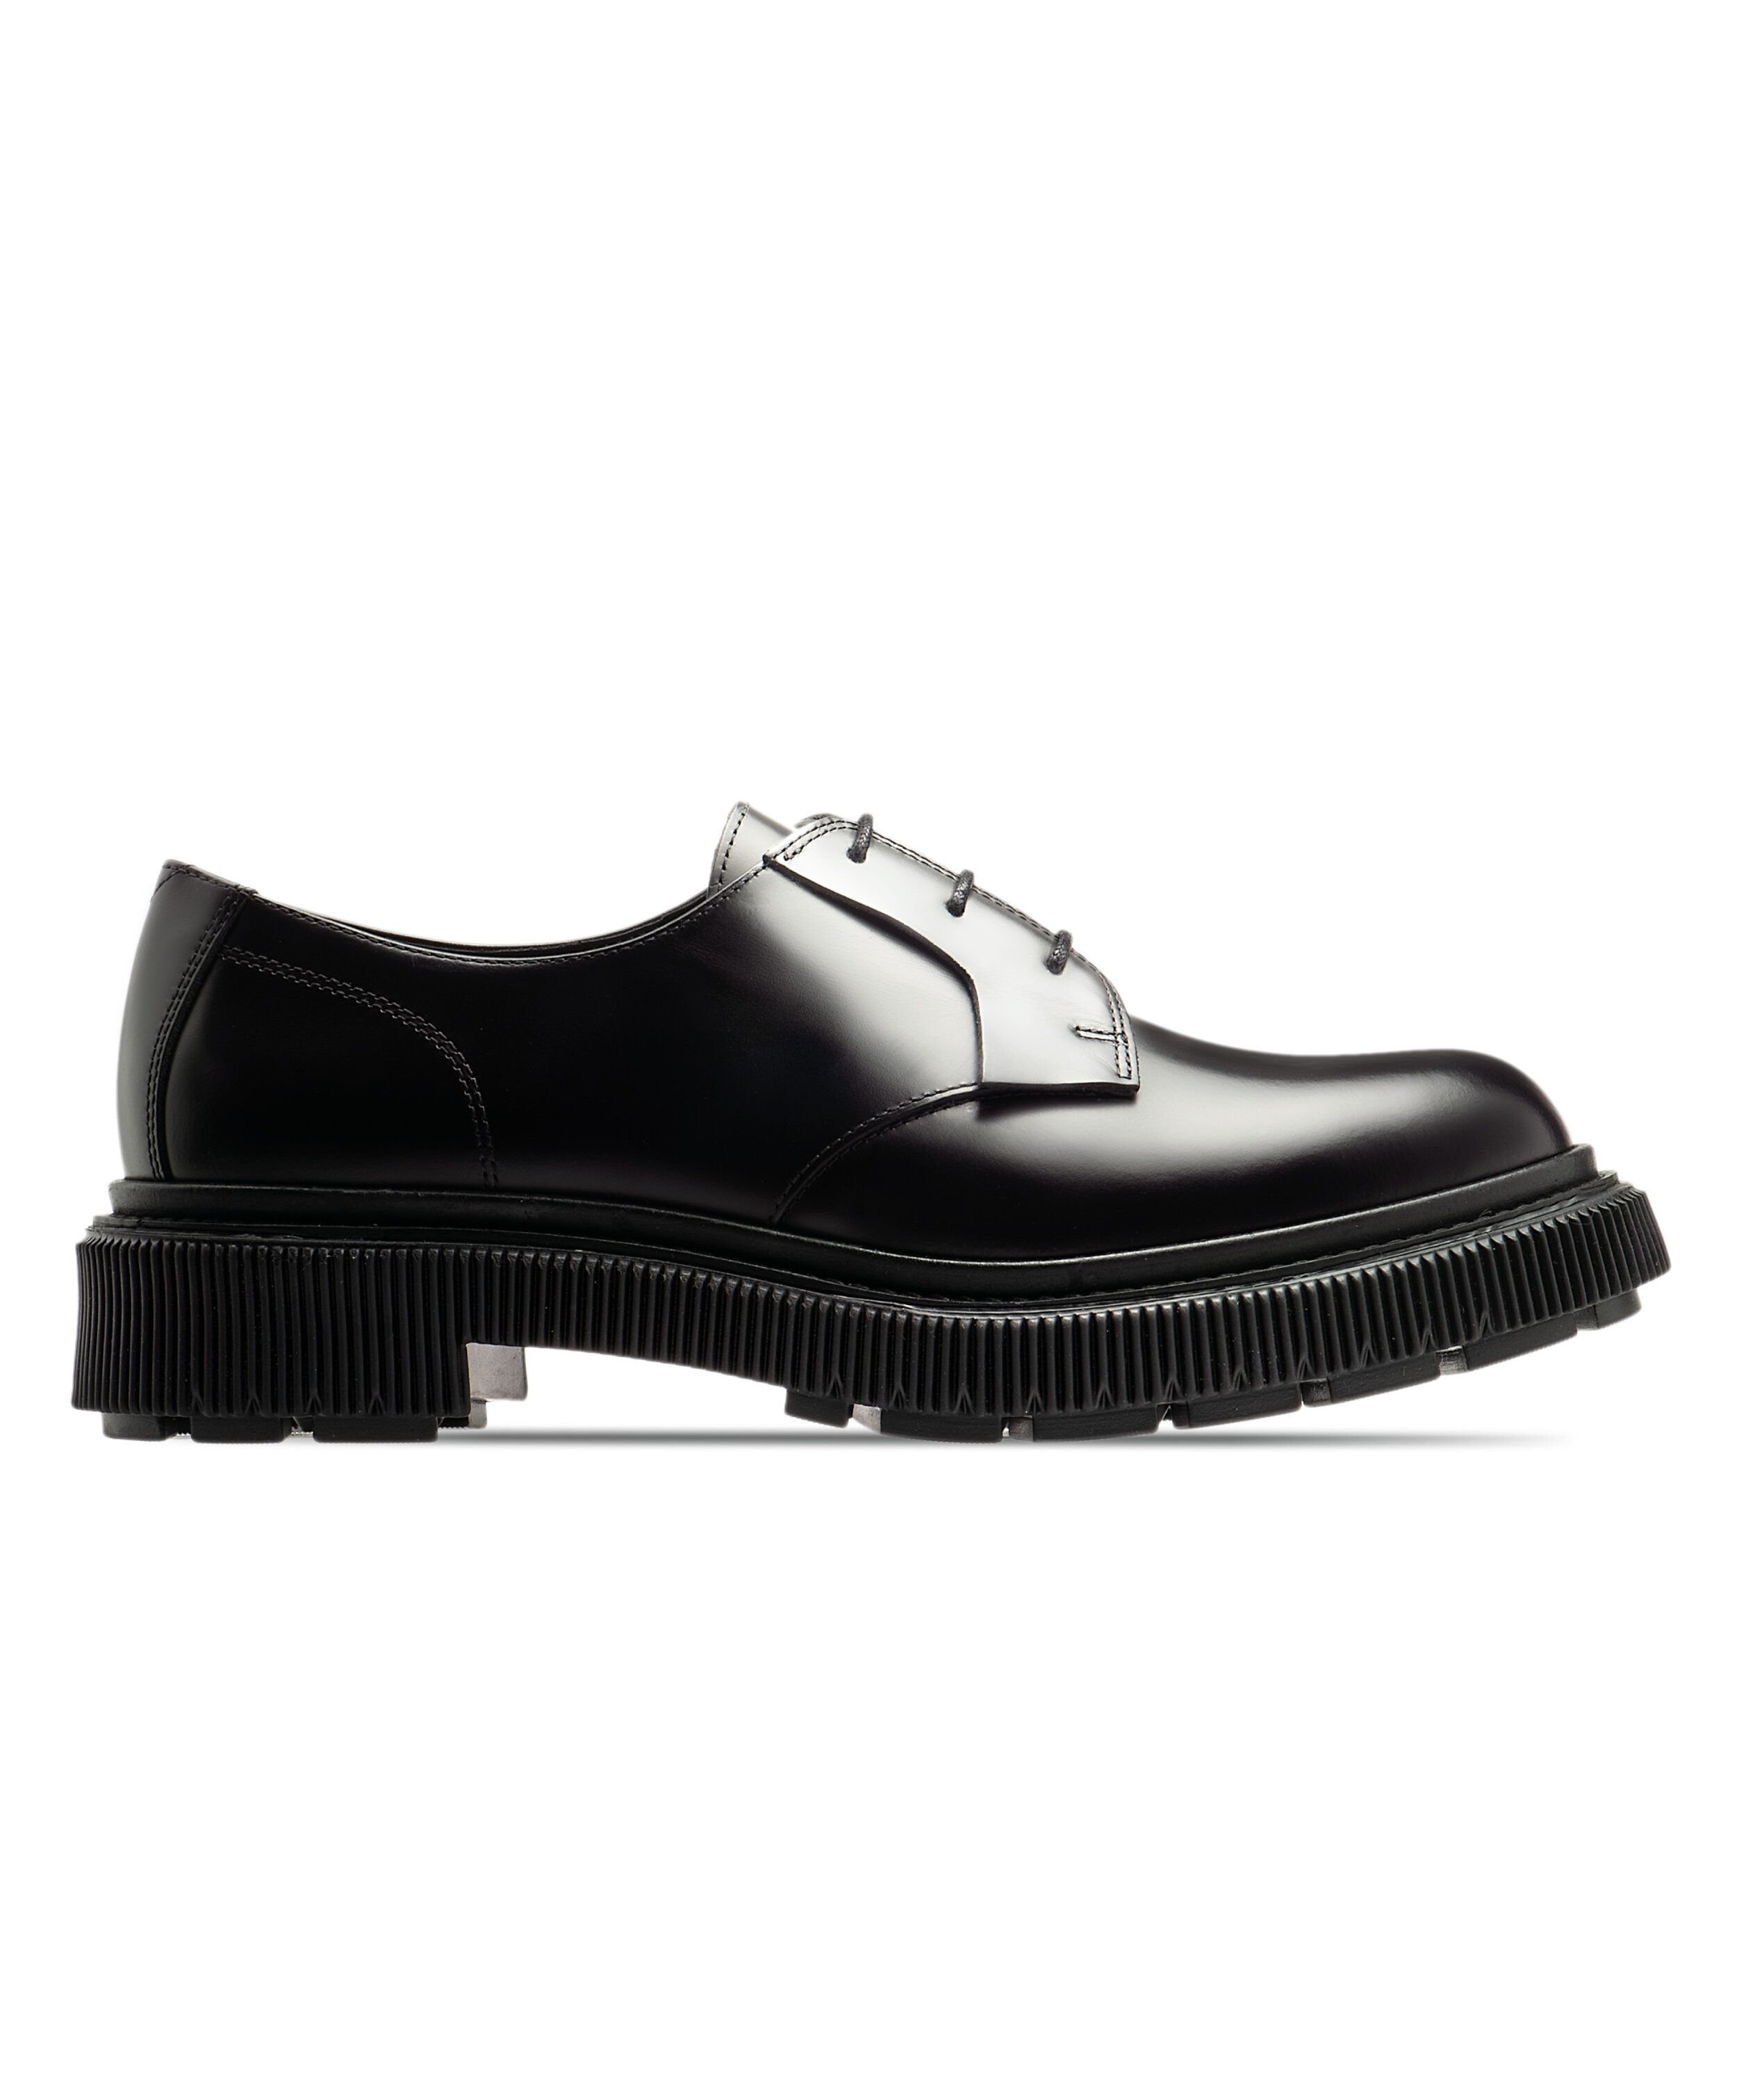 mfpen and Adieu Take on the Classic Derby and Loafer Style for Autumn ...